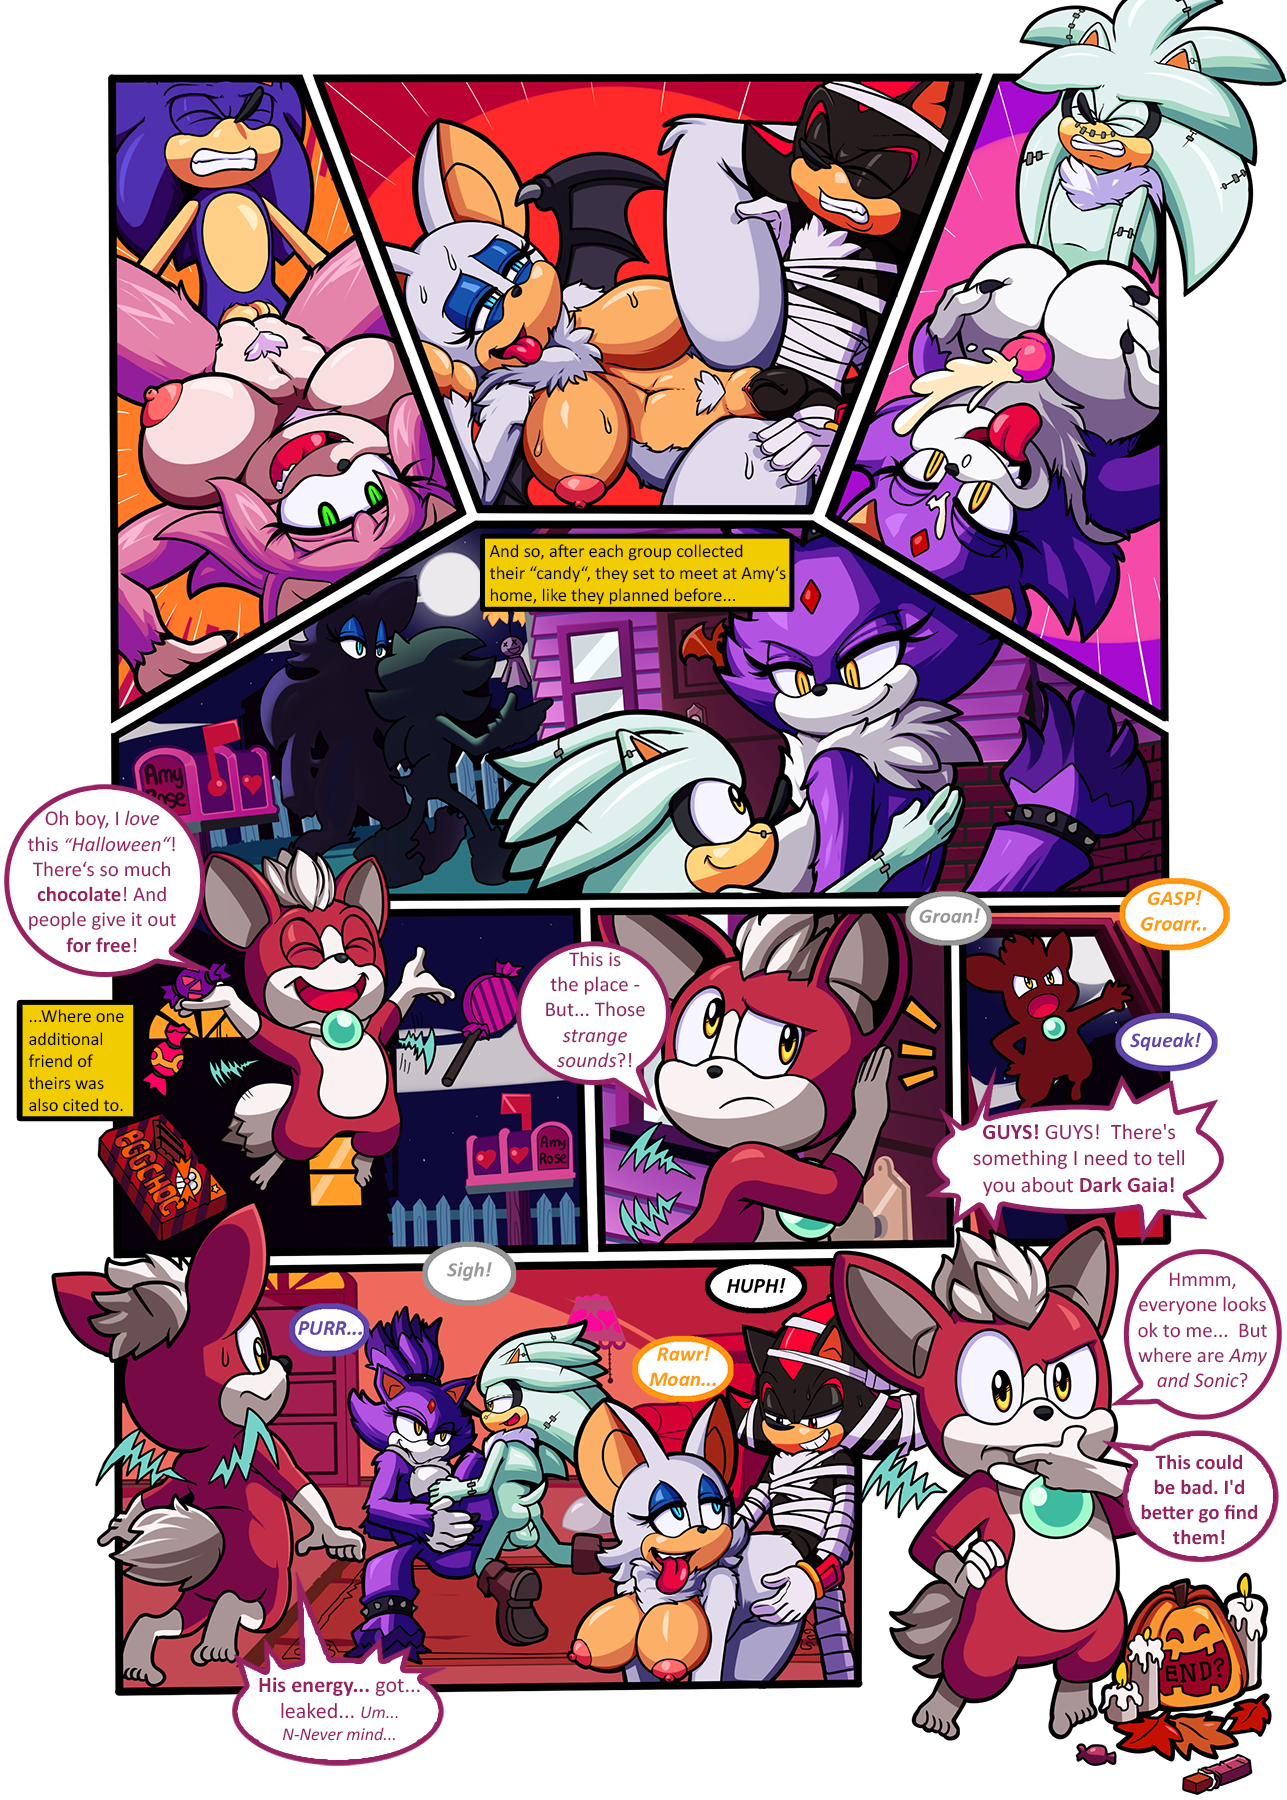 Calloween - A Sonic Unleashed Special porn comics Oral sex, Big Tits, Furry, Monster Girls, Titfuck